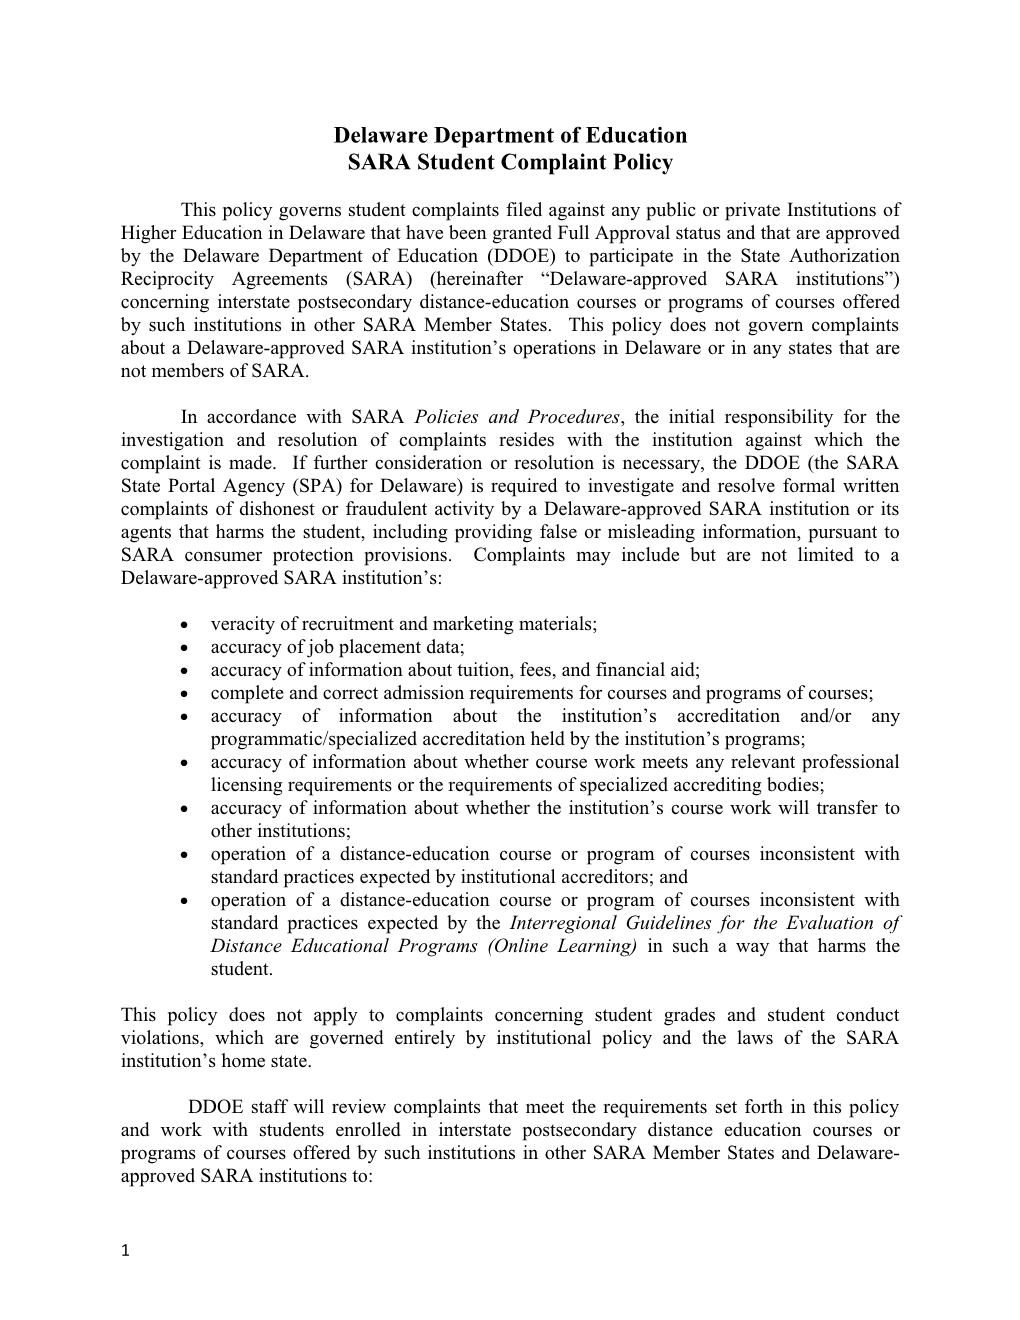 SARA Student Complaint Policy